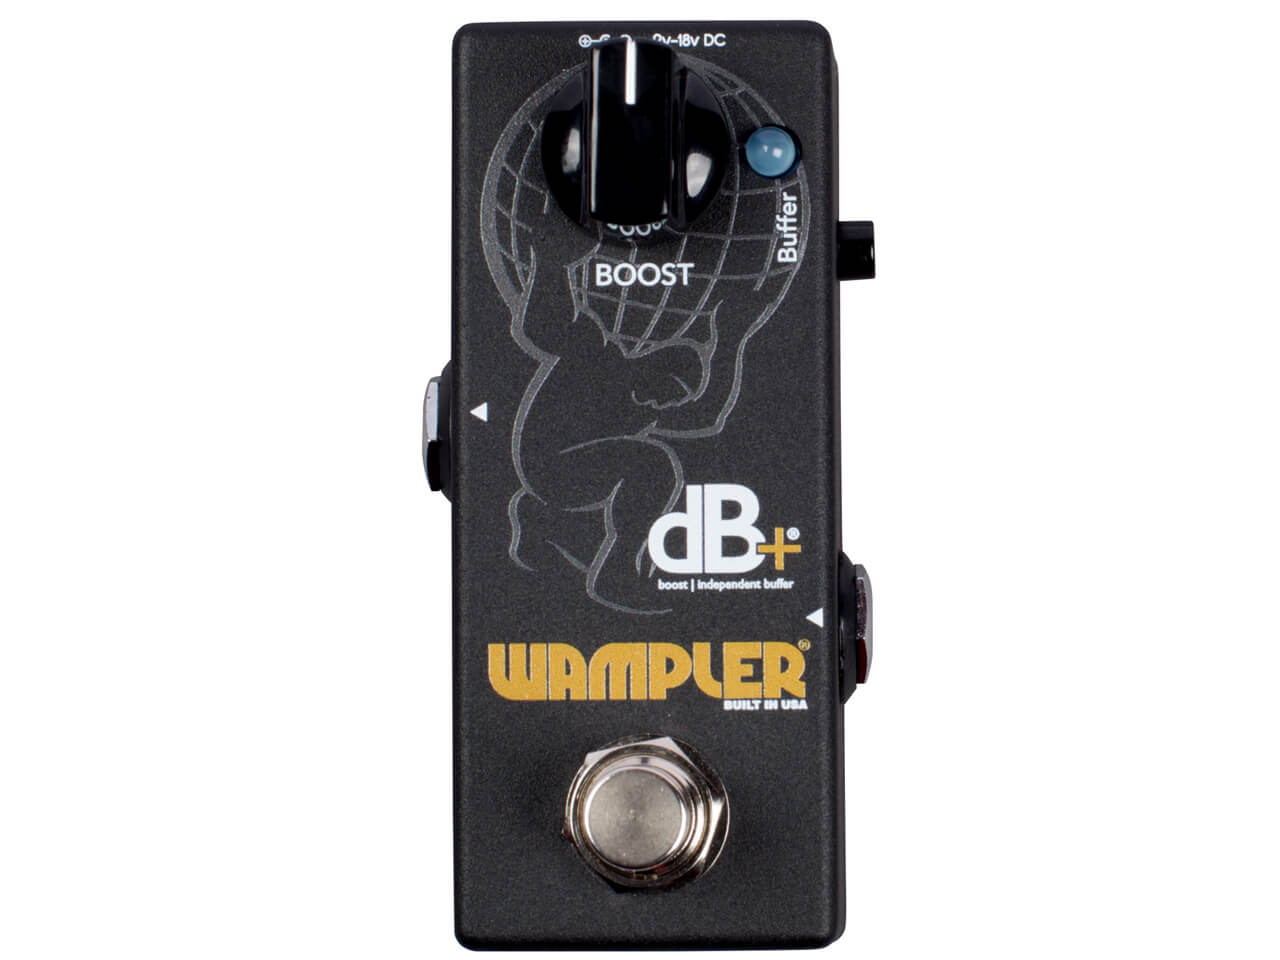 Wampler Pedals(ワンプラーペダル) dB+ – Boost/Independent Buffer(ブースト/バッファー)